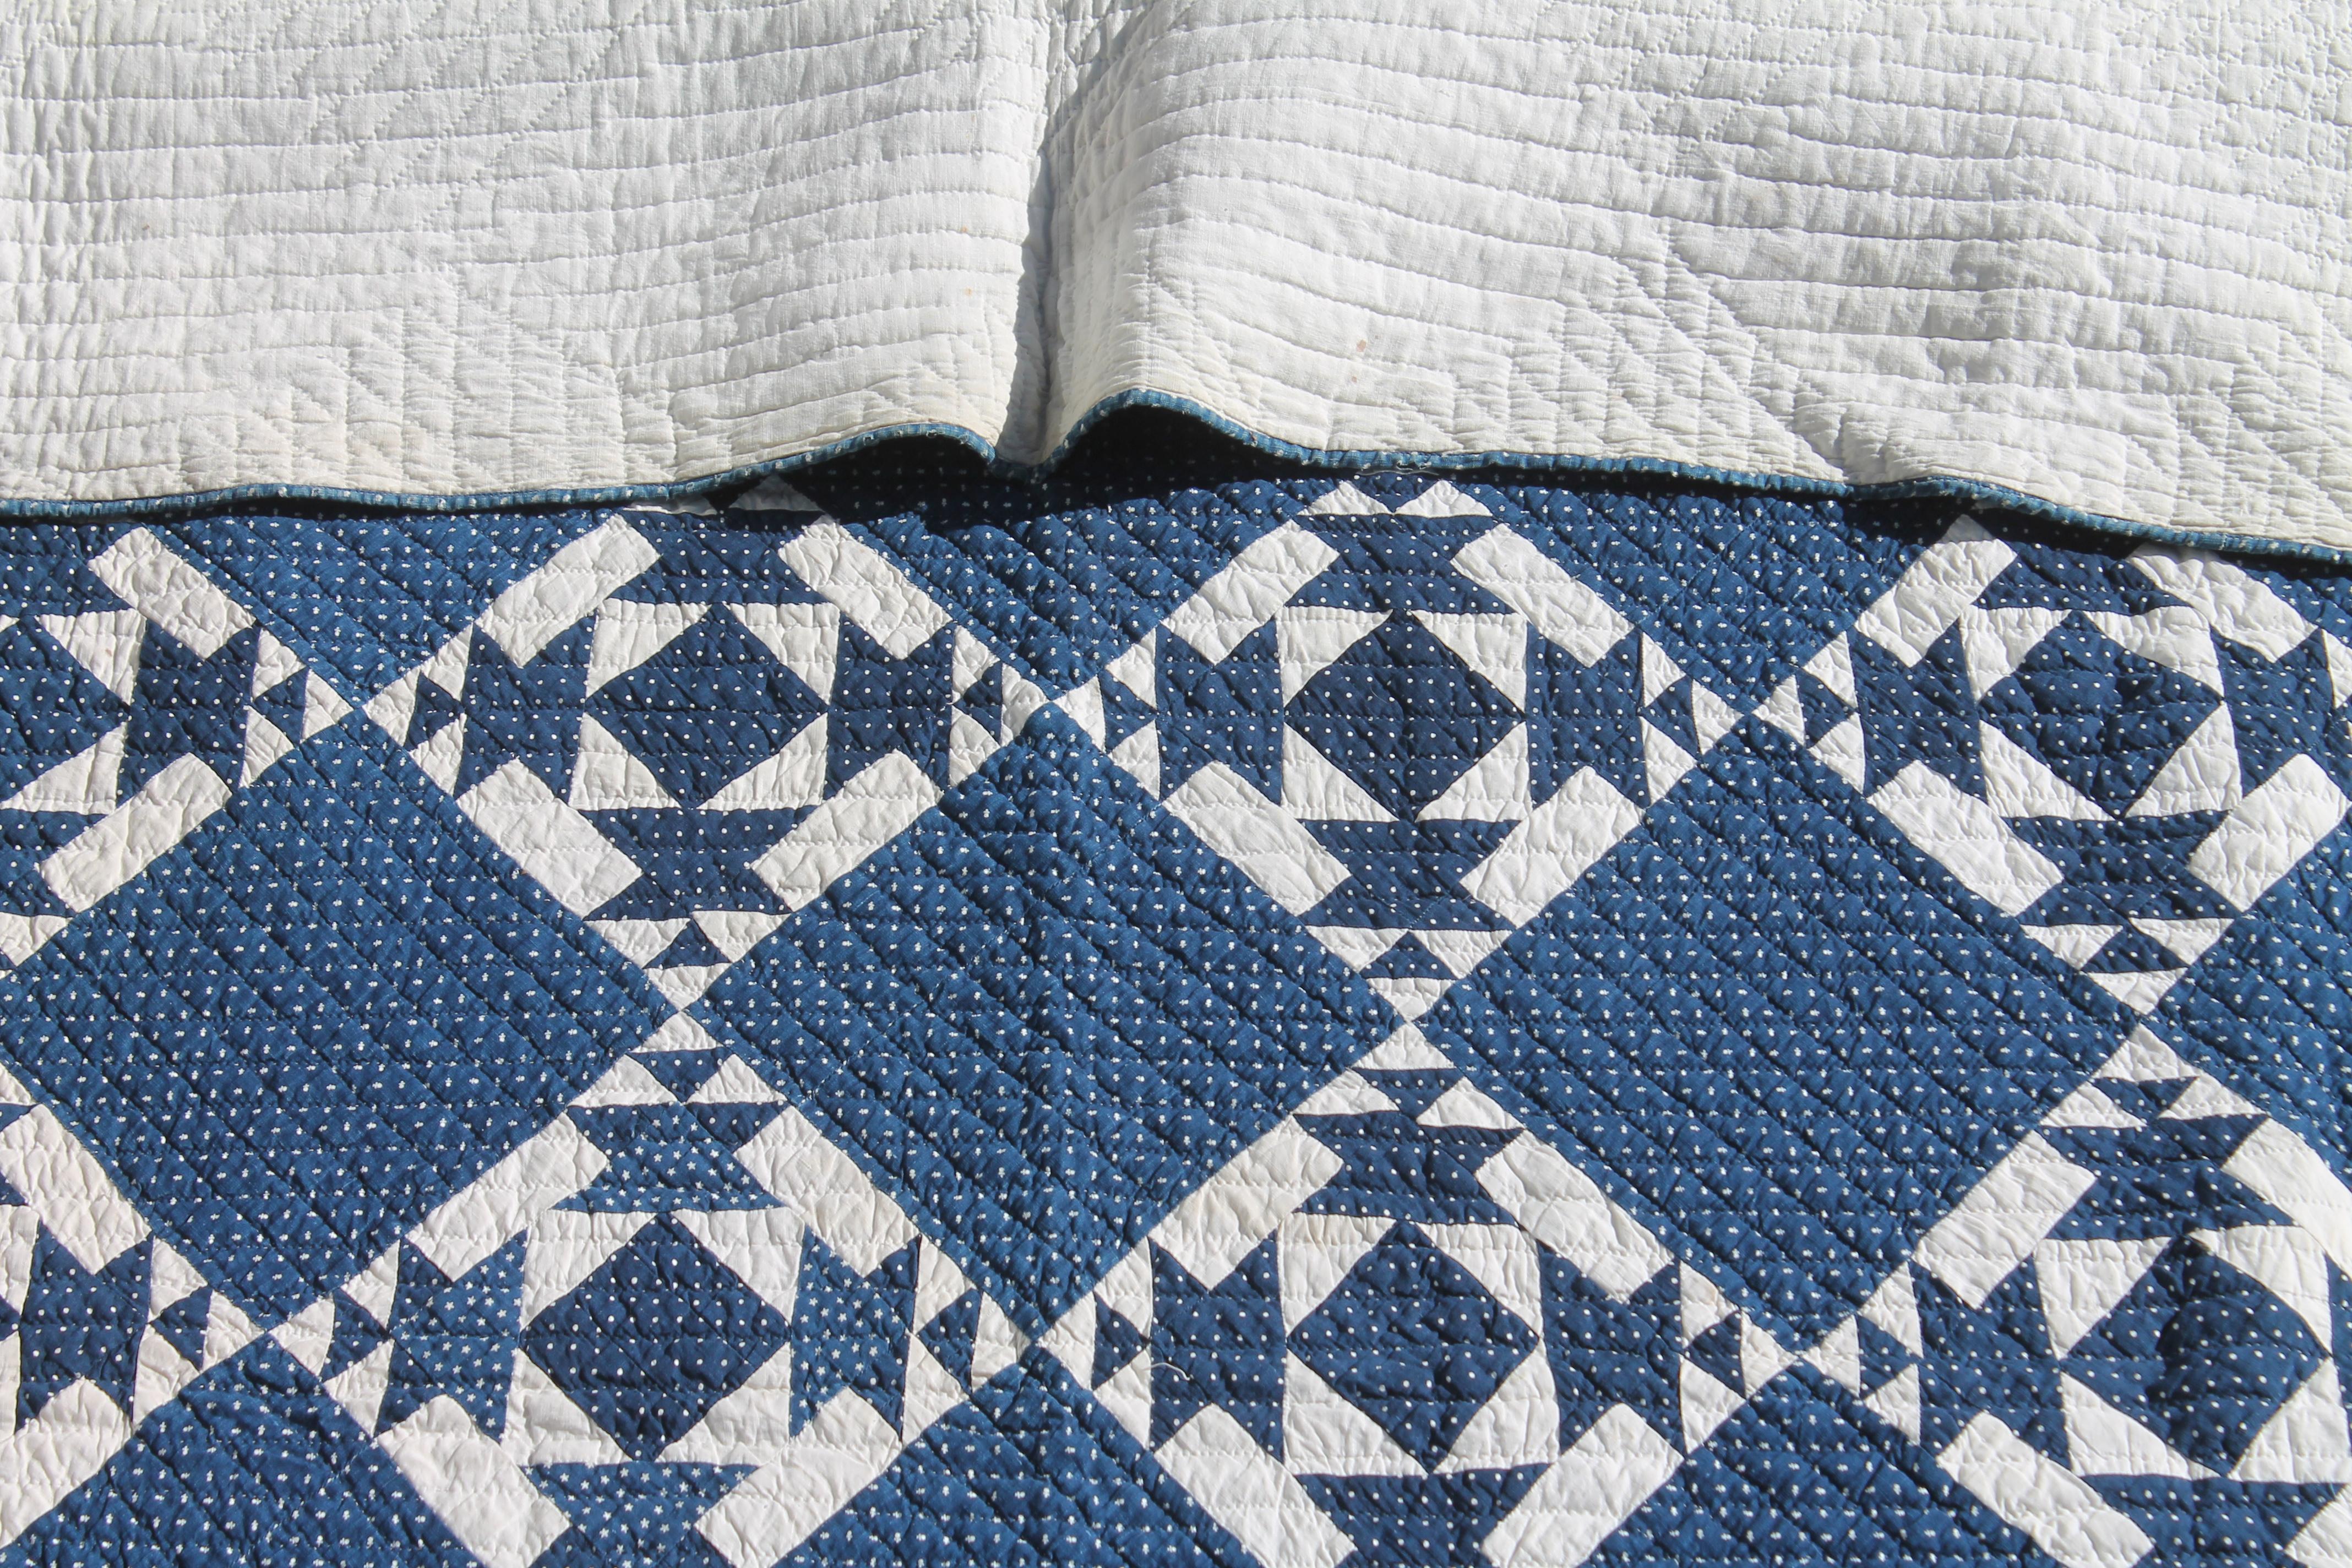 Hand-Crafted 19th Century Blue and White Geometric Quilt